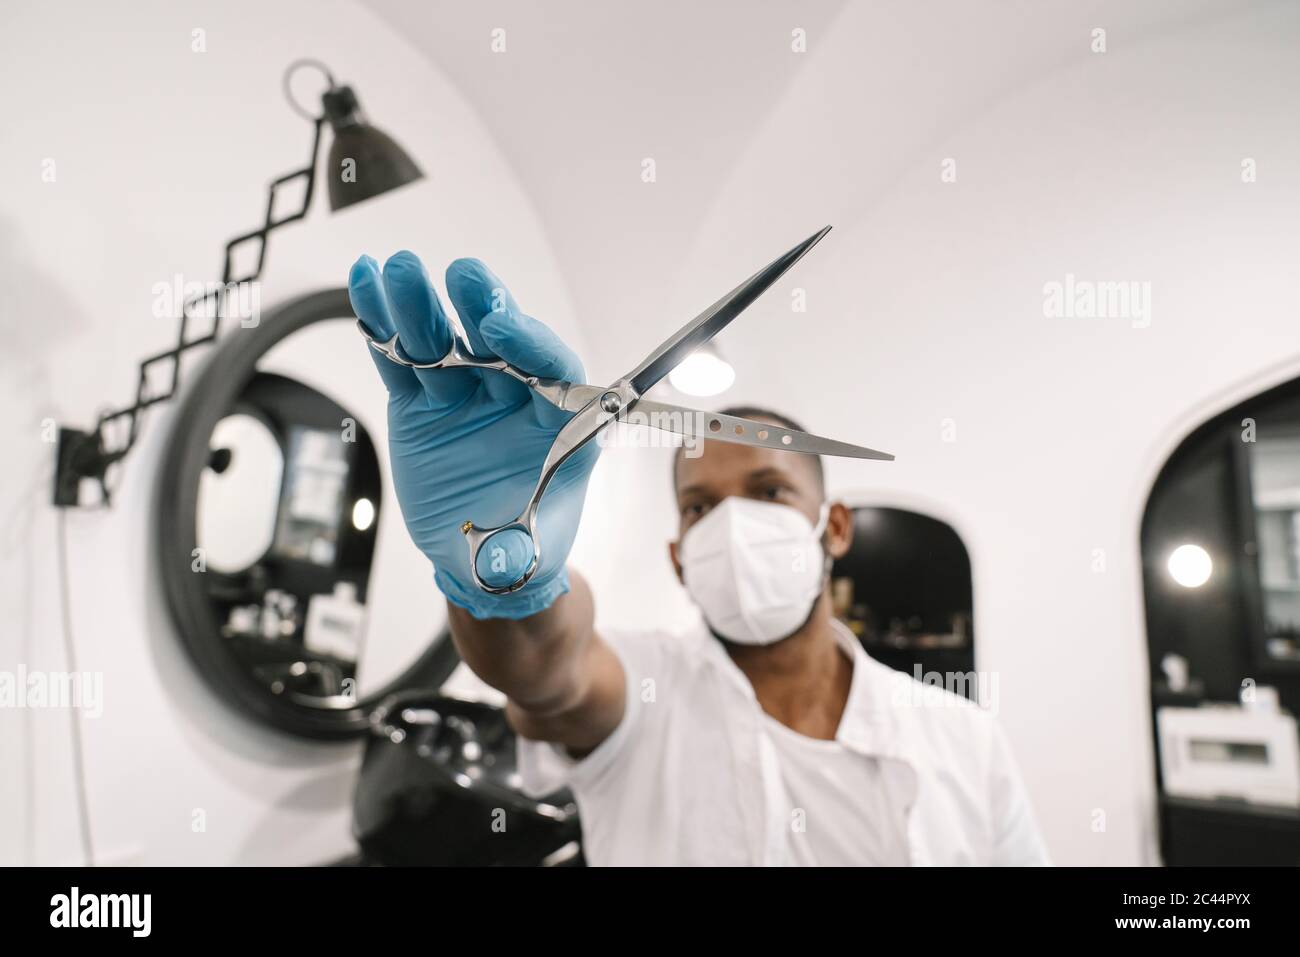 Barber wearing surgical mask and reusable gloves holding scissors Stock Photo